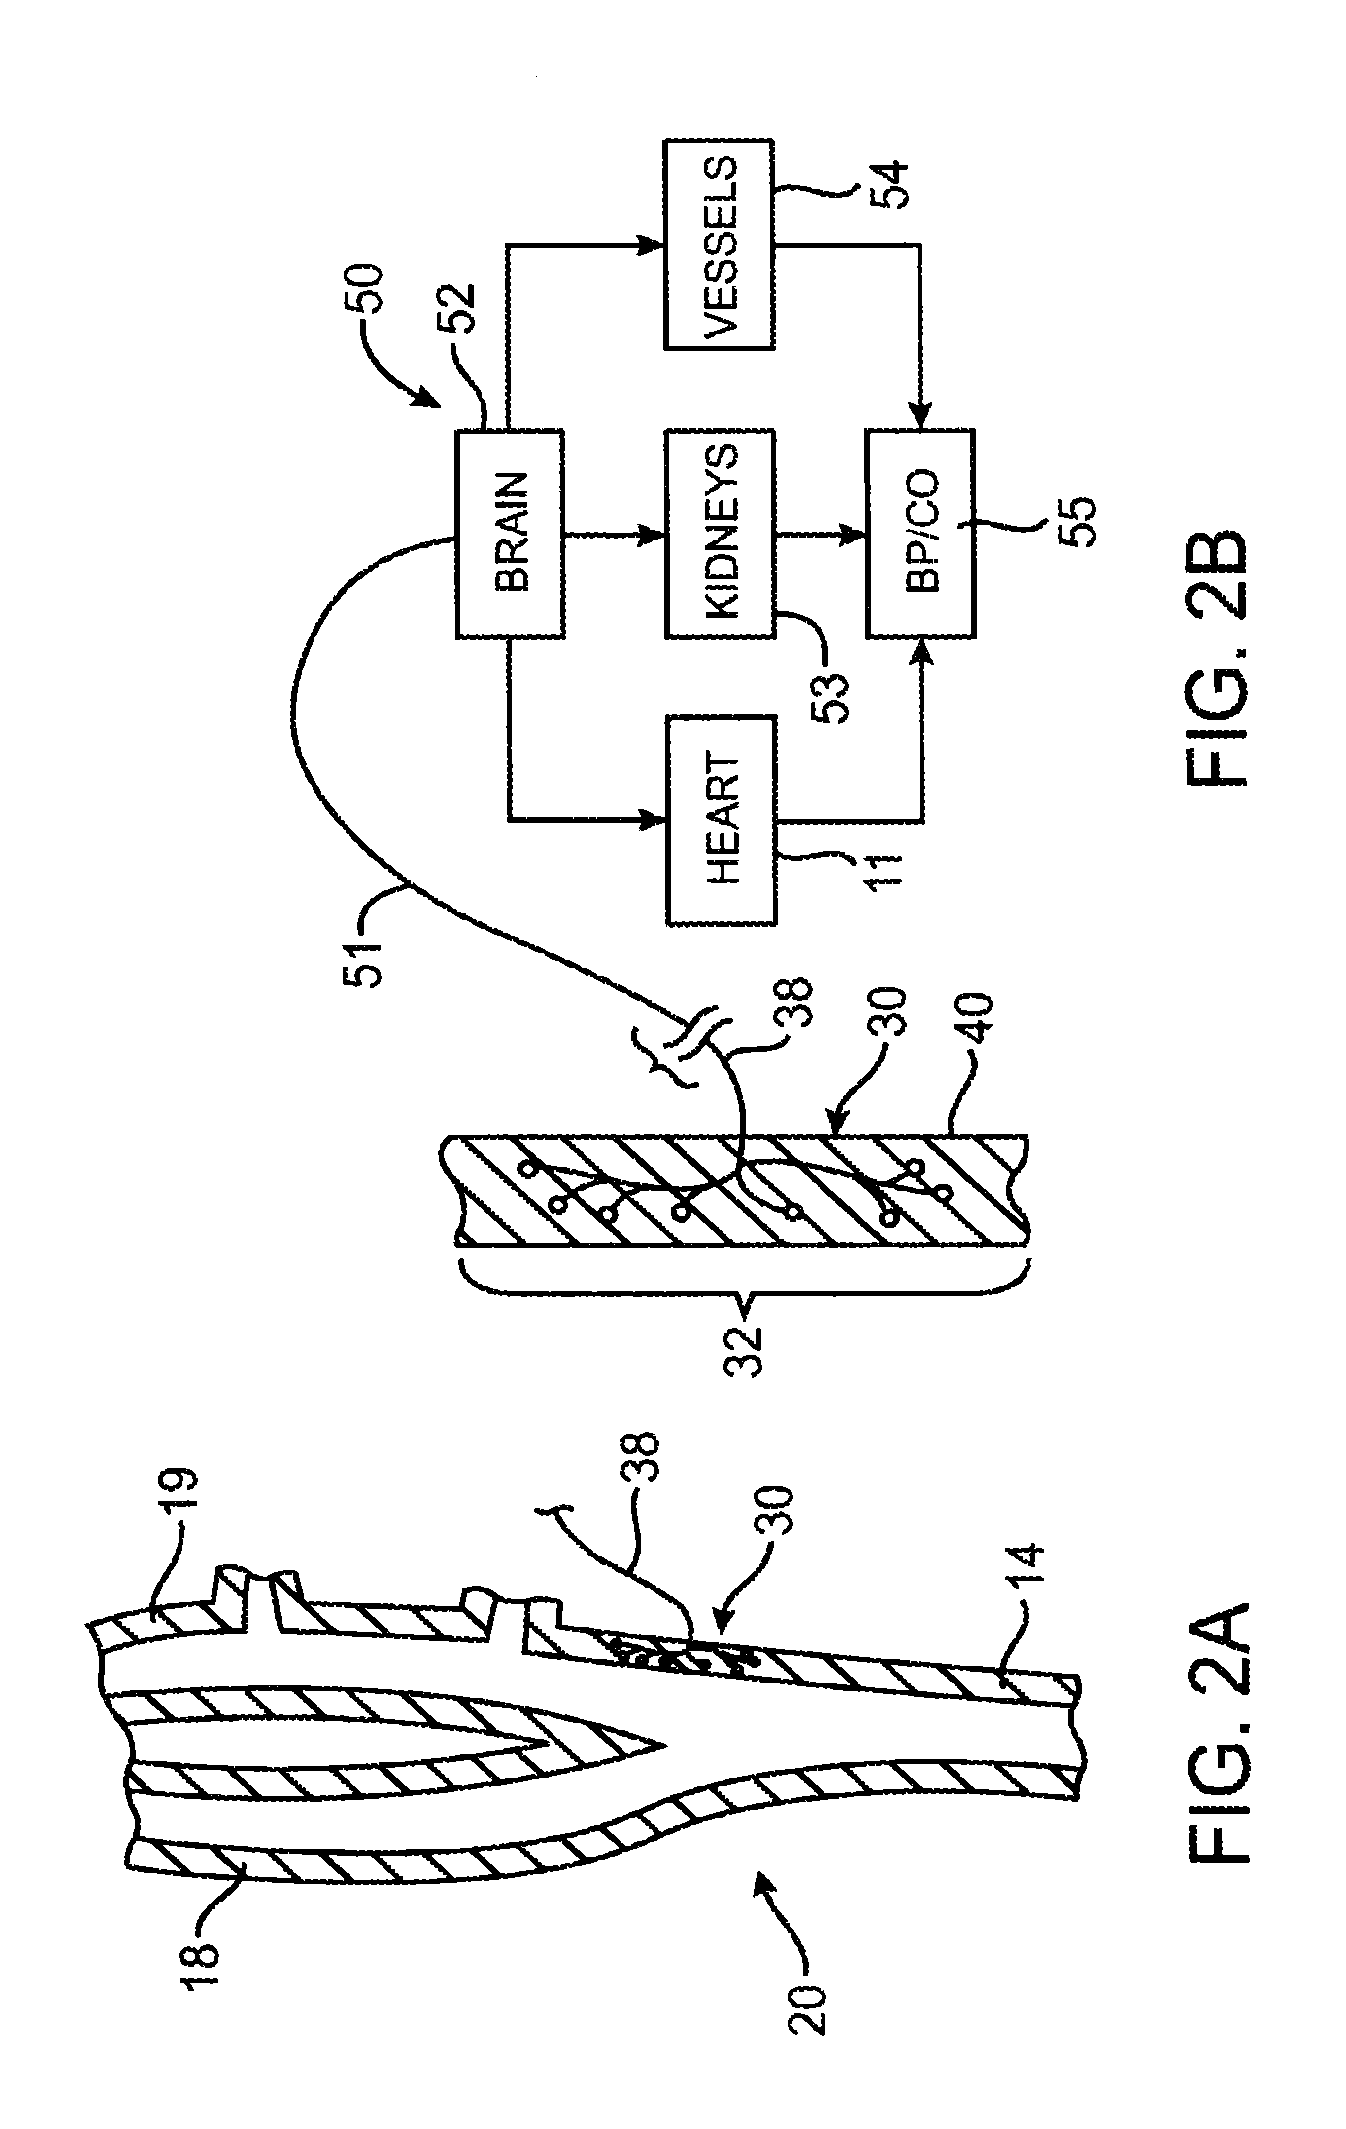 Electrode structures and methods for their use in cardiovascular reflex control